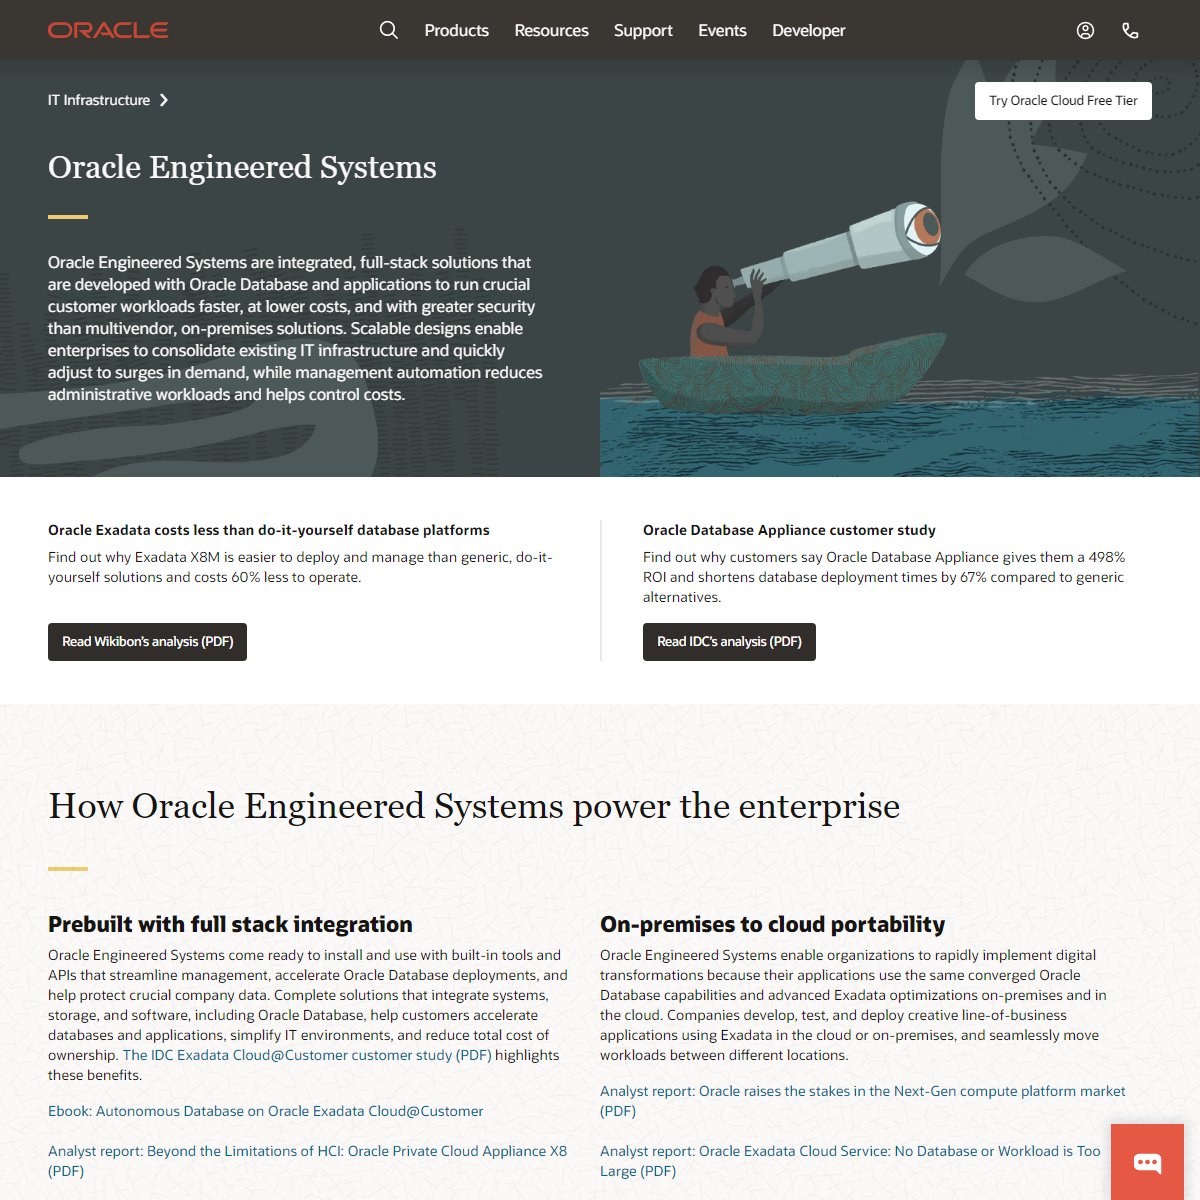 A complete backup of https://www.oracle.com/engineered-systems/